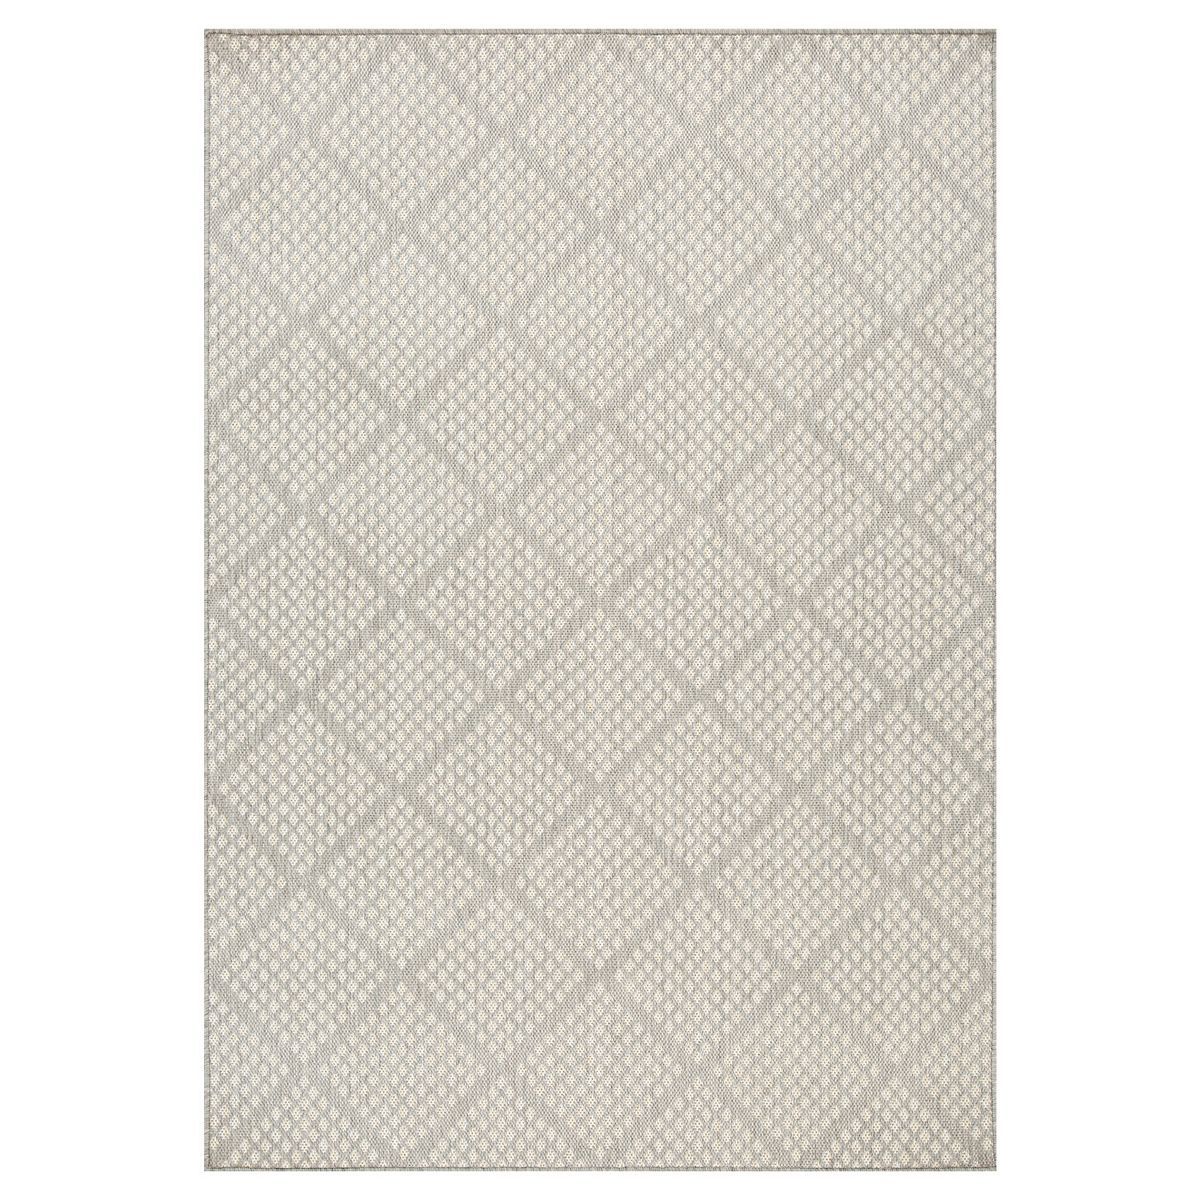 Sonoma Goods For Life® Dotted Diamond Indoor/Outdoor Area Rug | Kohl's